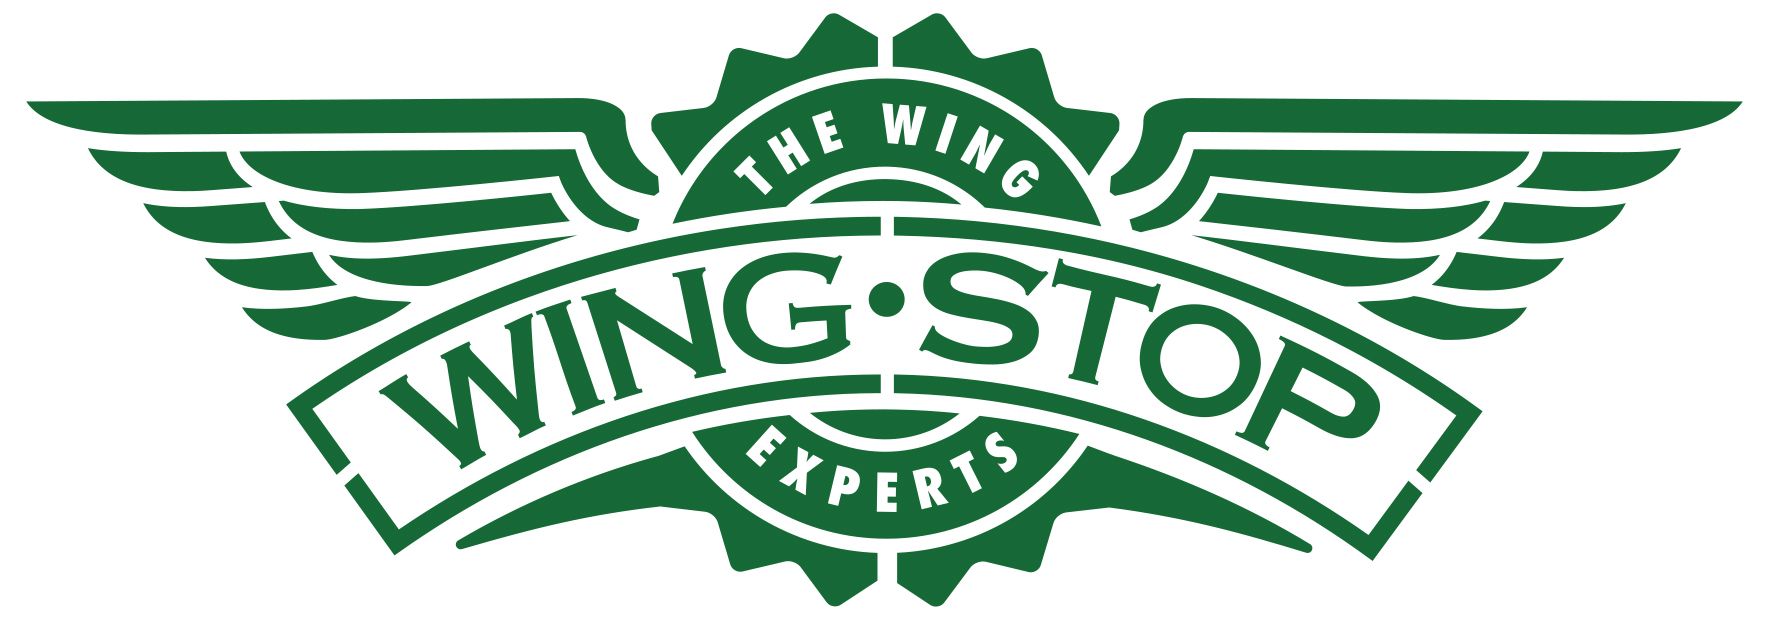 Wingstop Logo Vector at Collection of Wingstop Logo